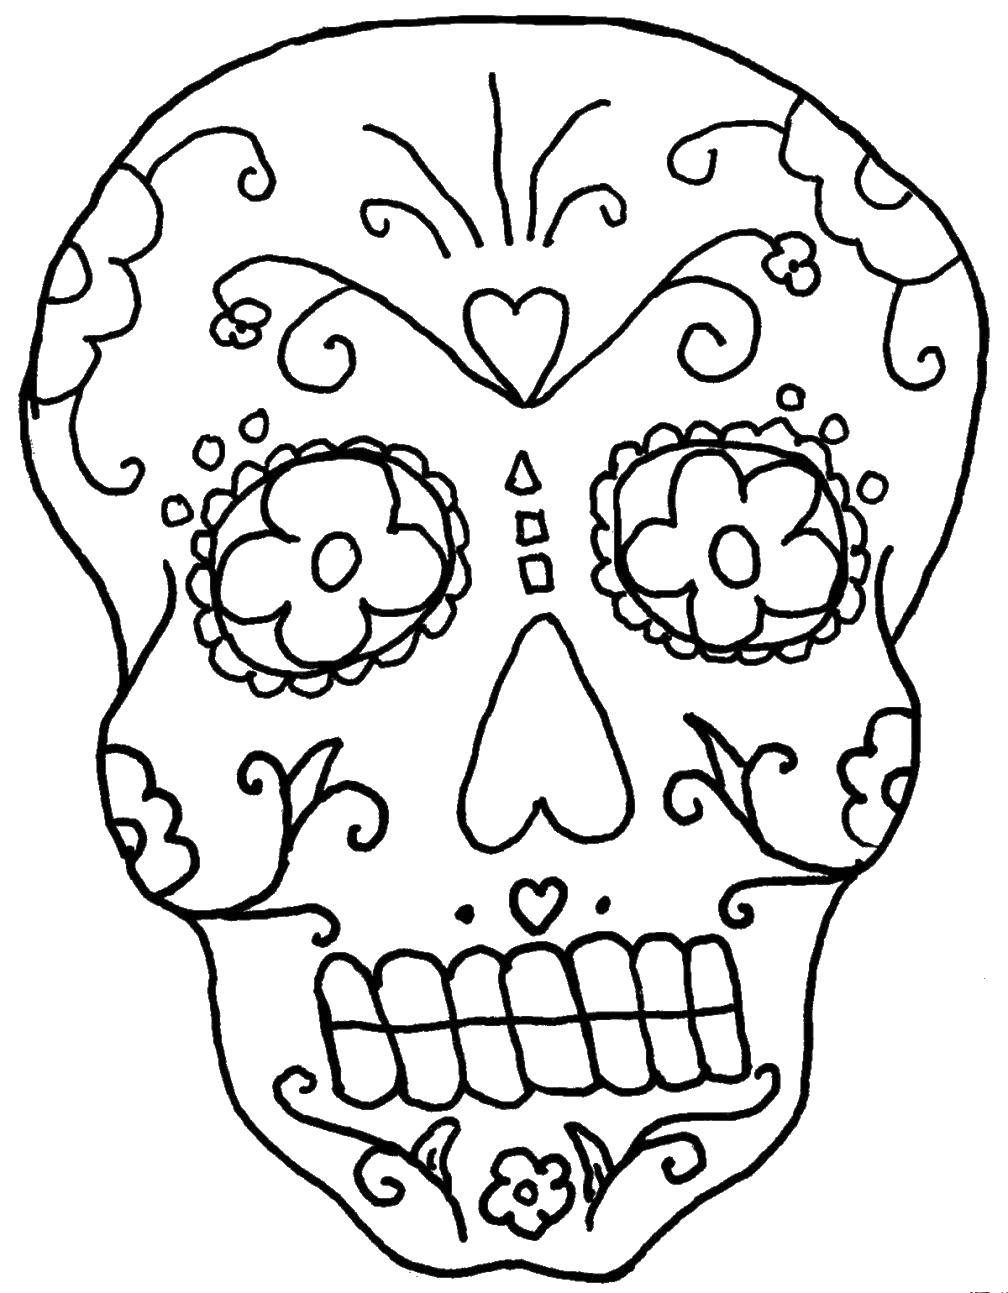 Coloring Skull with colors, patterns. Category Skull. Tags:  patterns, flowers, skulls.